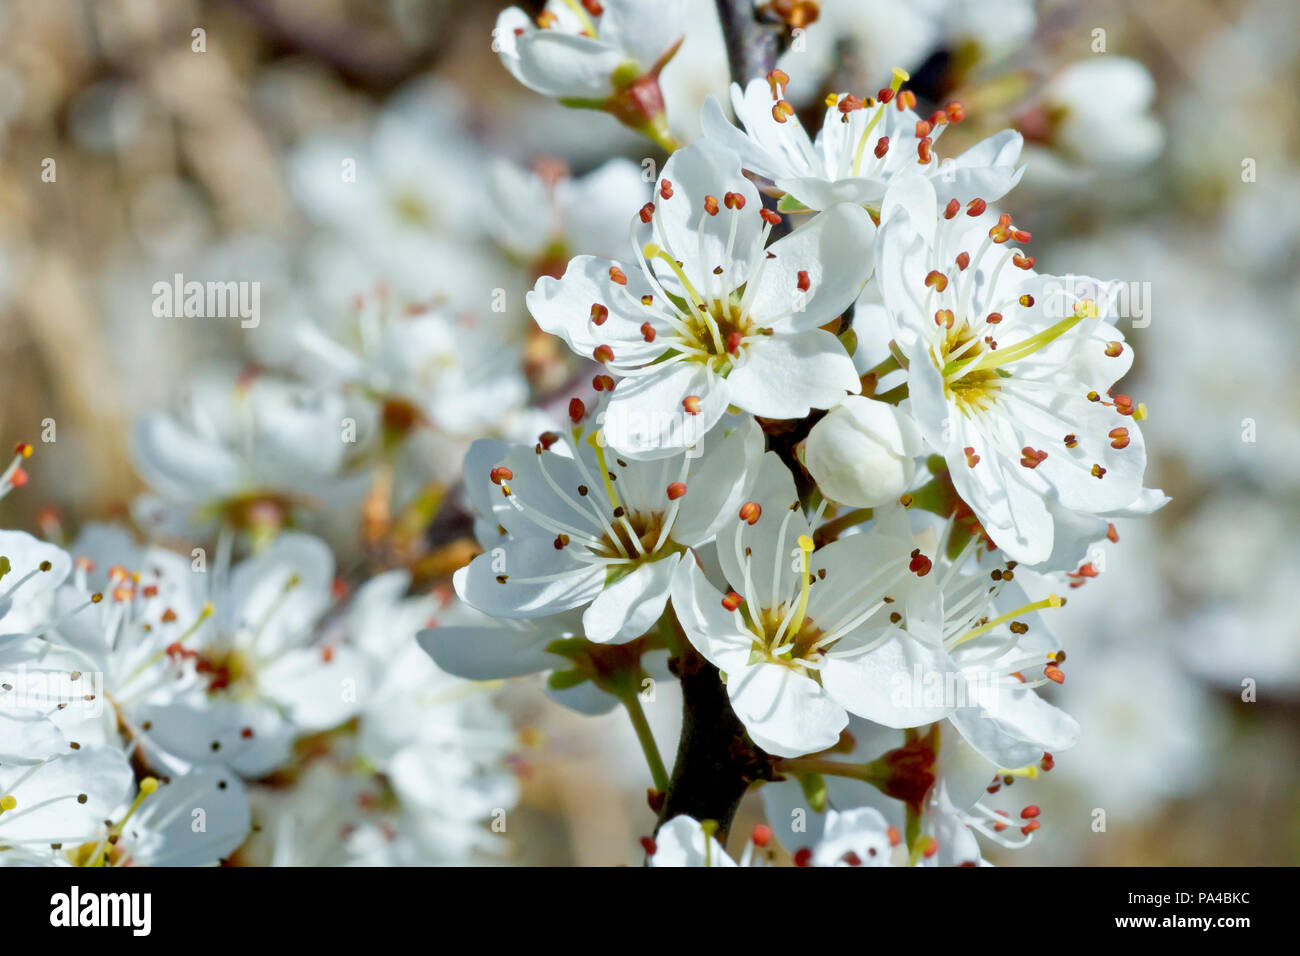 Sloe (prunus spinosa), also known as Blackthorn, close up of a group of flowers. Stock Photo